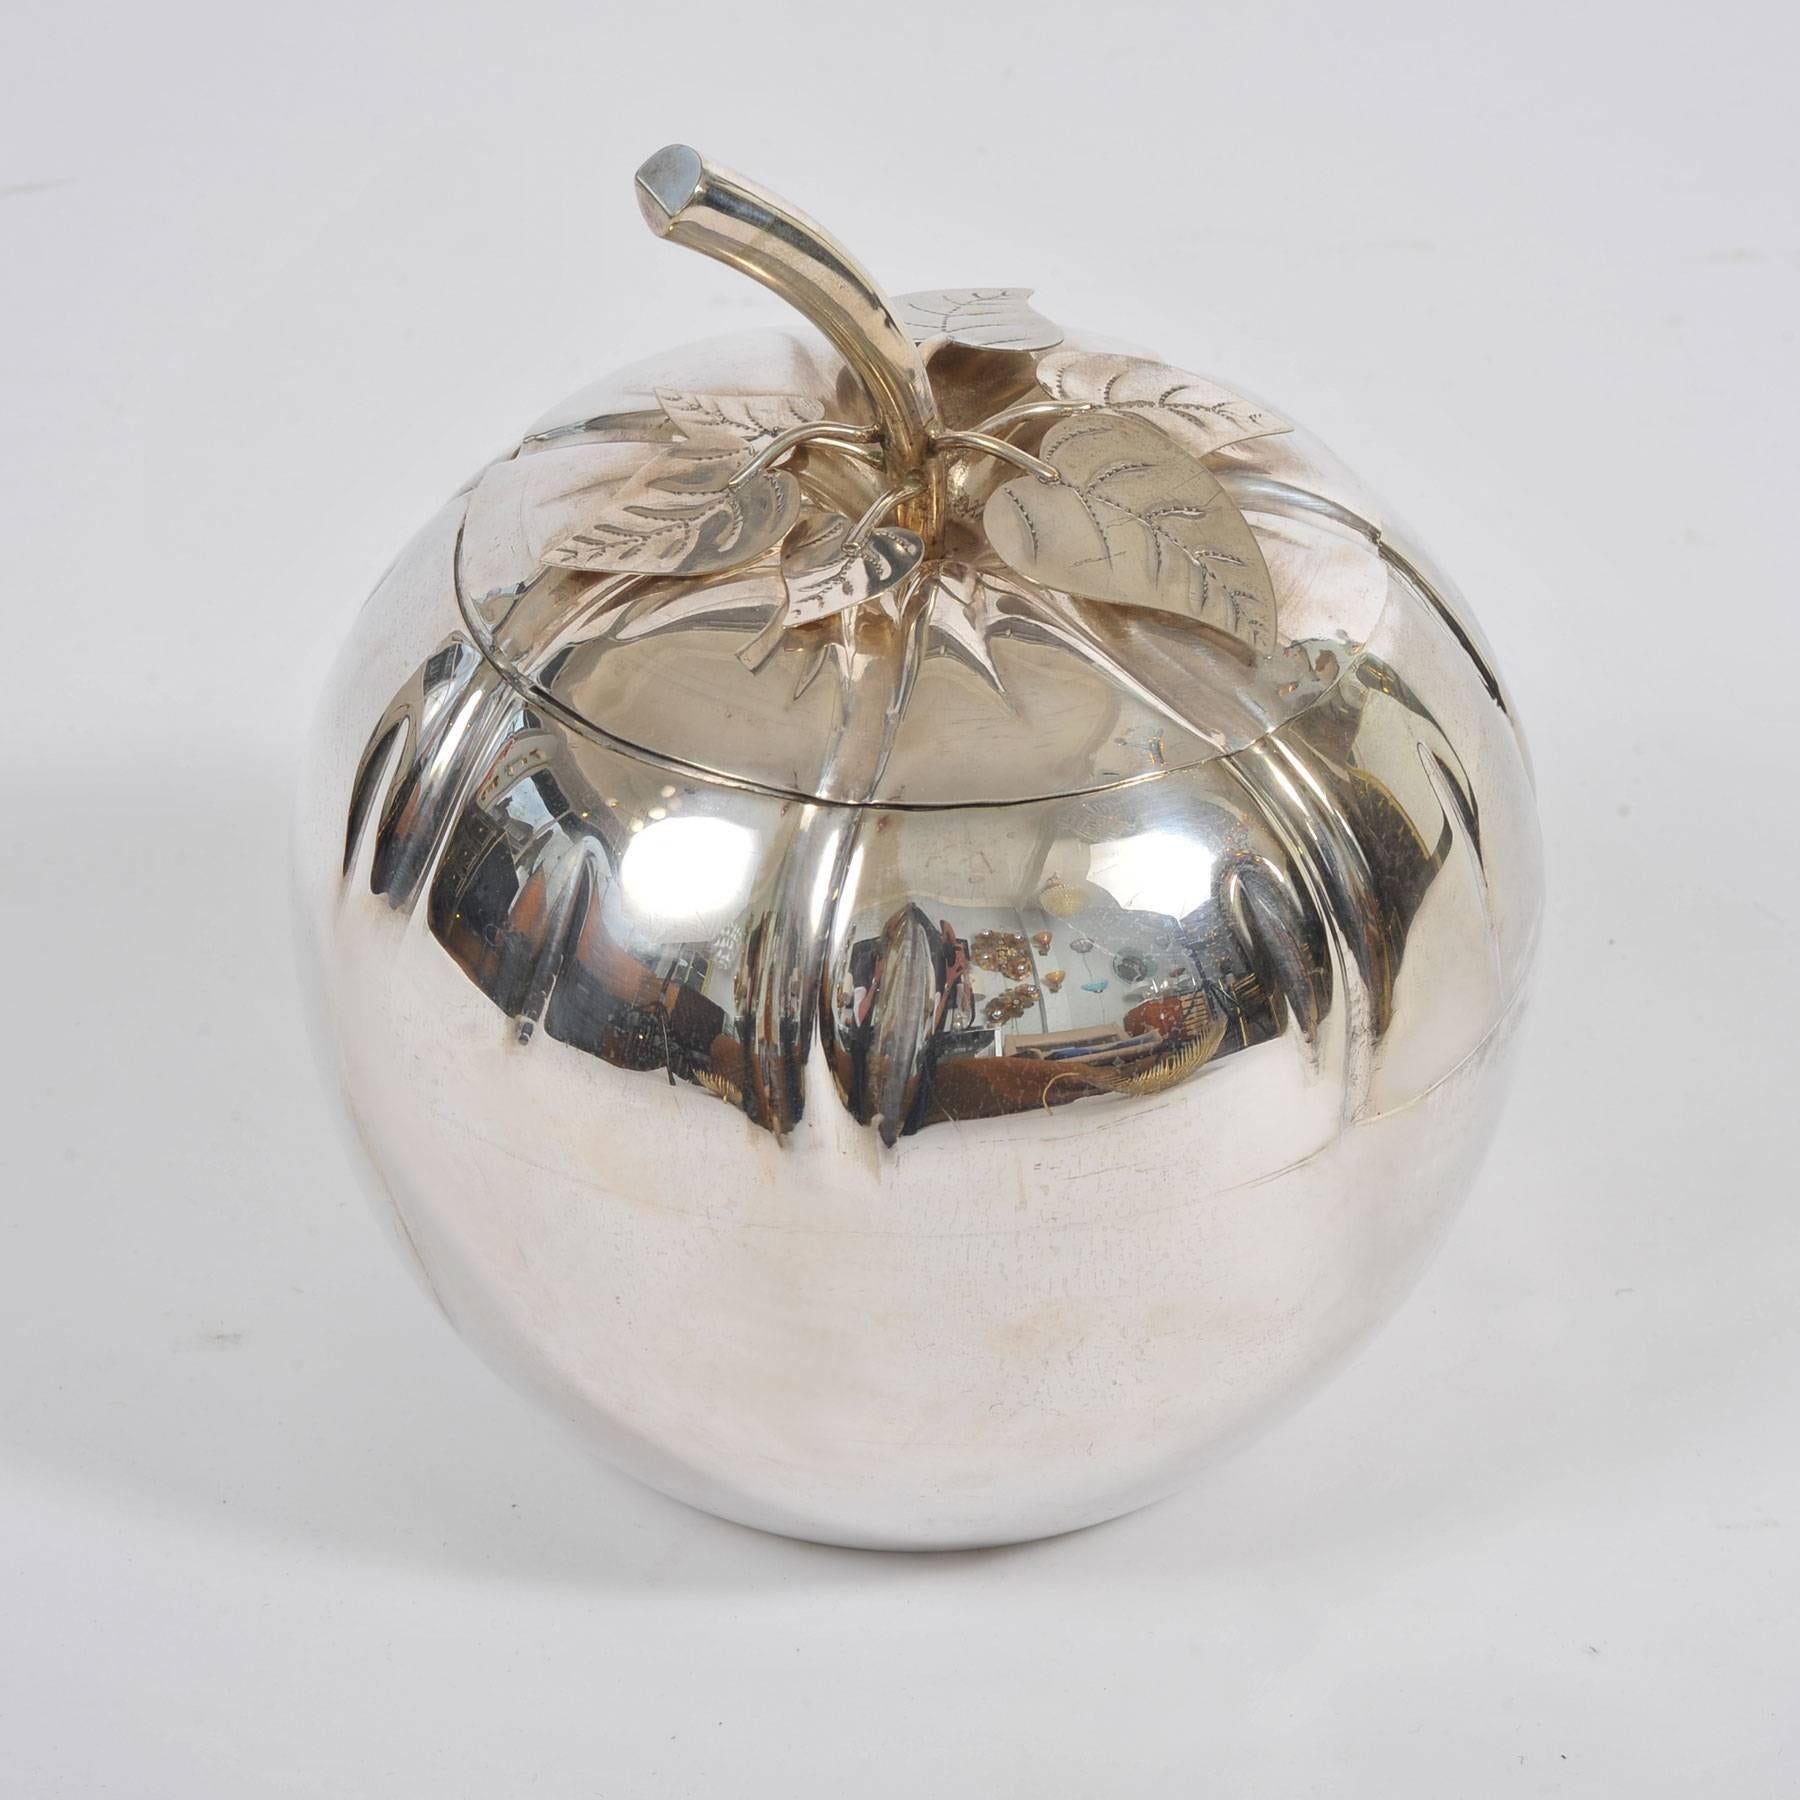 'Silvered' ice bucket with beautiful detailing in the form of a tomato.

        